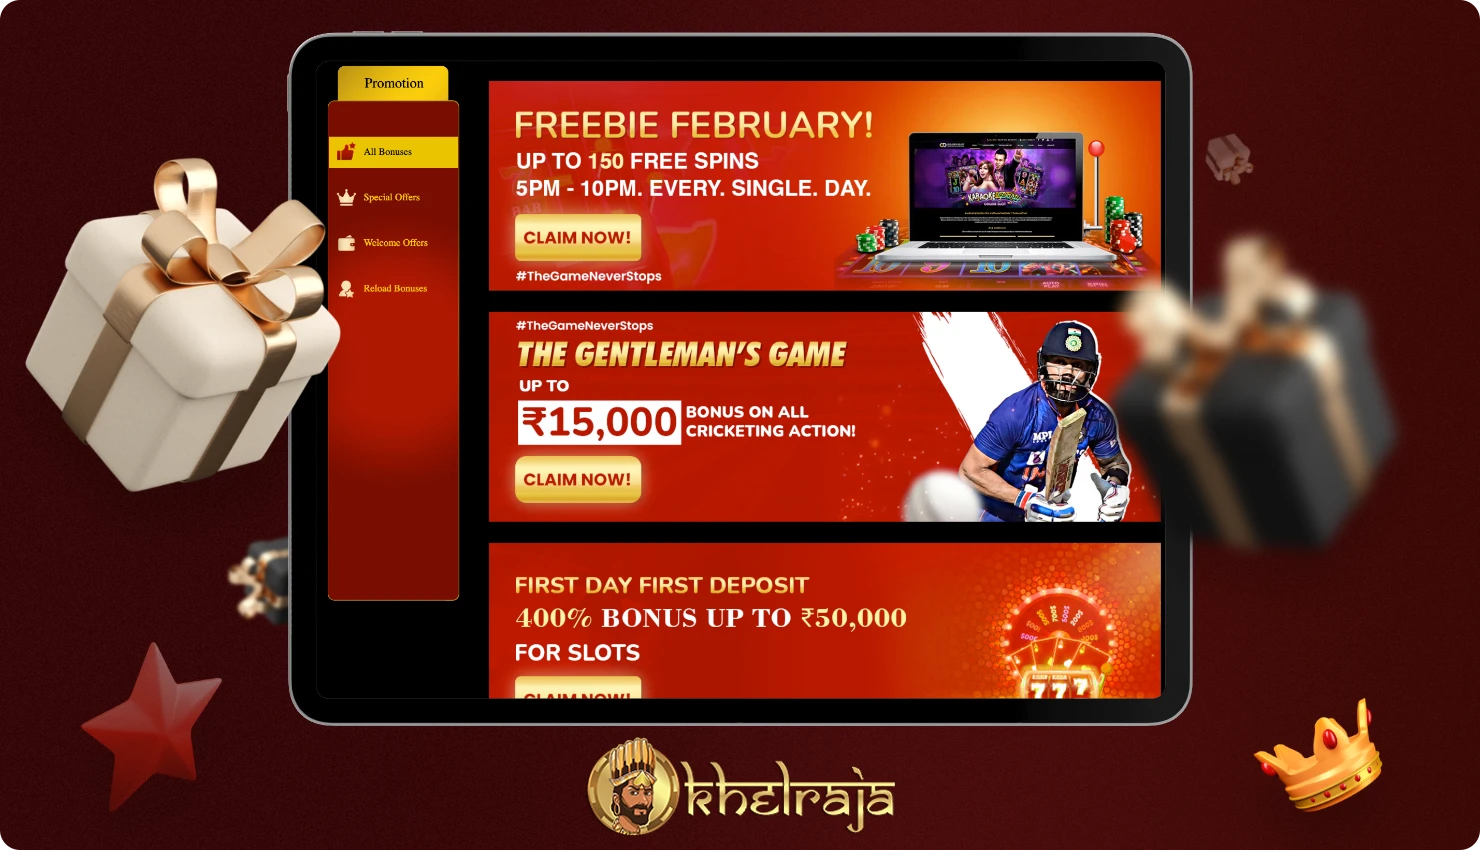 Khelraja users from India have the opportunity to receive bonuses and participate in promotions for additional bonuses